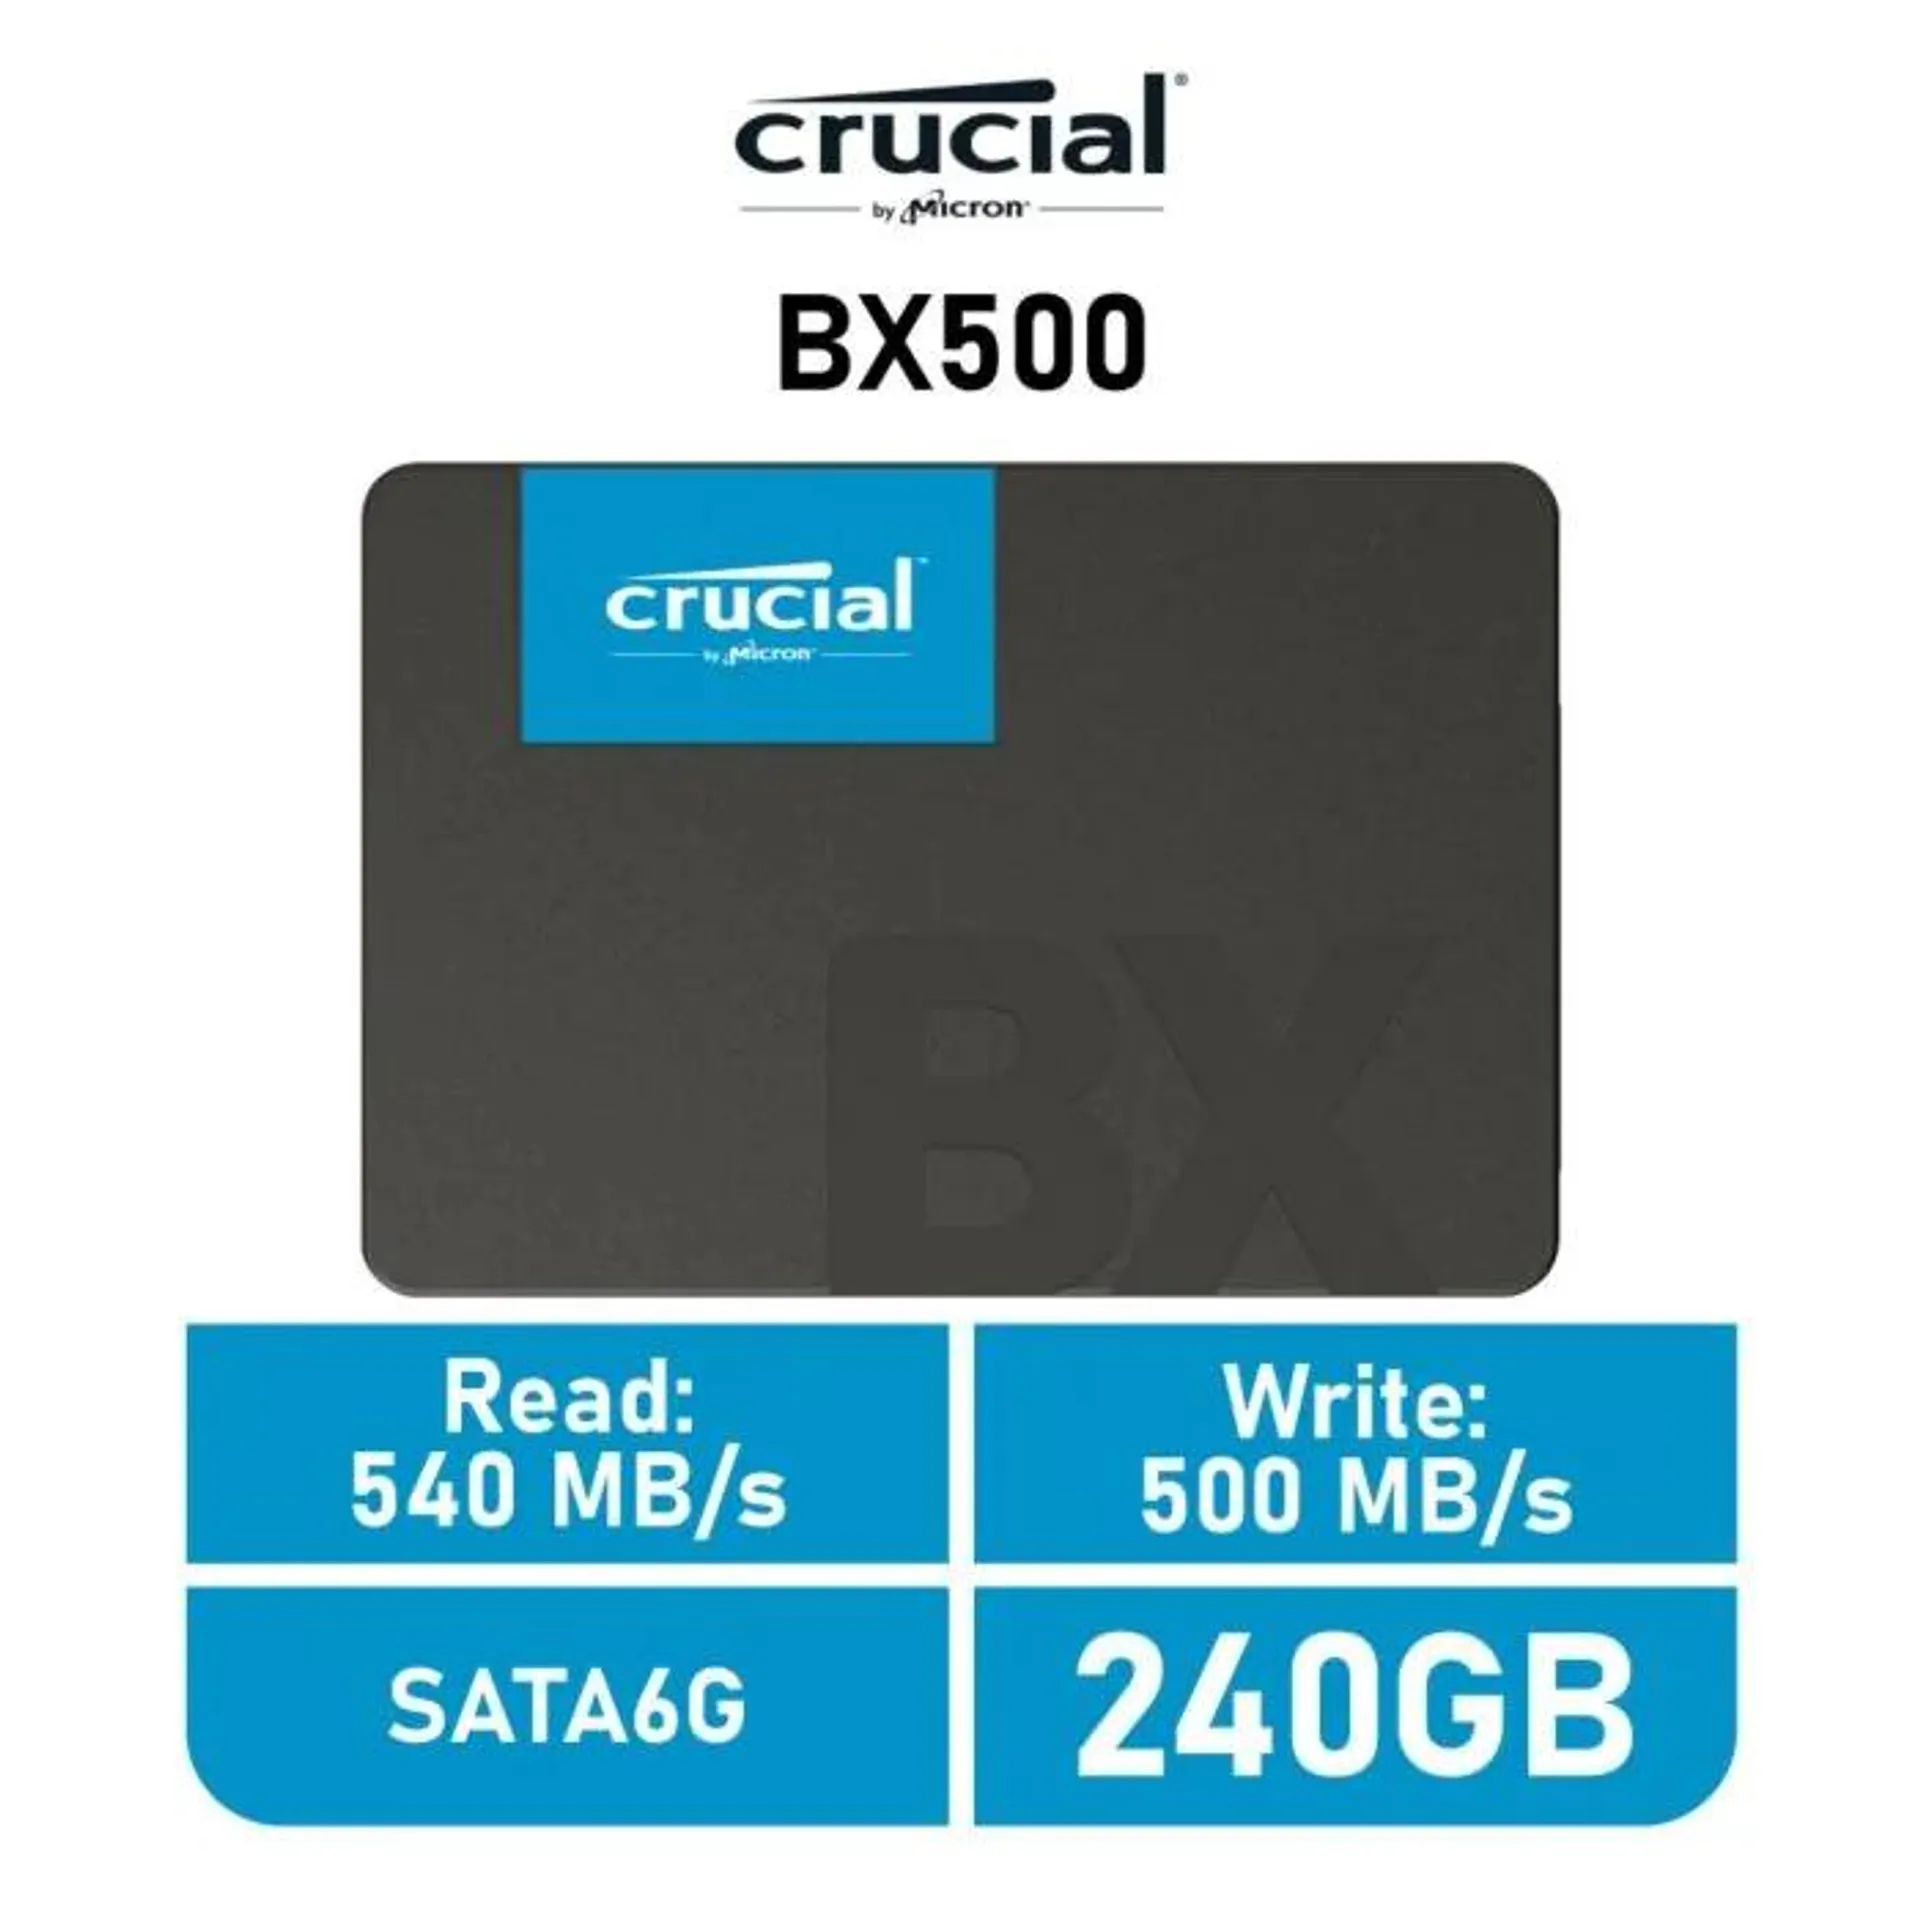 Crucial BX500 240GB SATA6G CT240BX500SSD1 2.5" Solid State Drive